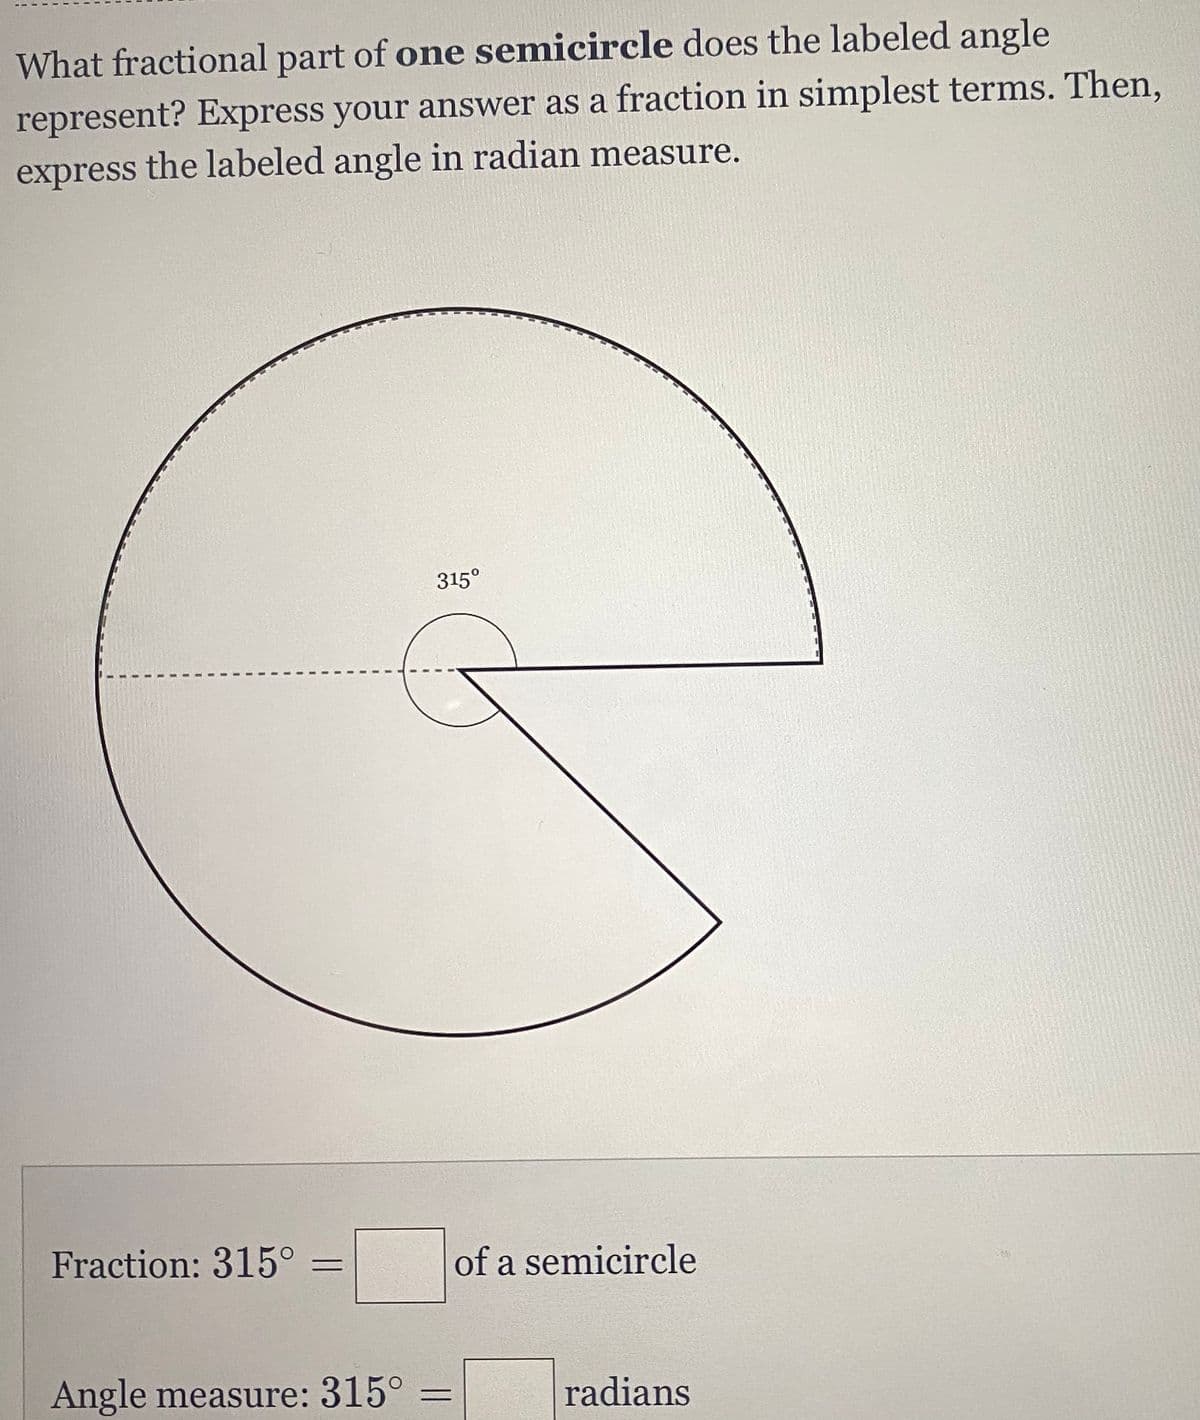 What fractional part of one semicircle does the labeled angle
represent? Express your answer as a fraction in simplest terms. Then,
express the labeled angle in radian measure.
315⁰
G
Fraction: 315⁰
of a semicircle
Angle measure: 315° =
radians